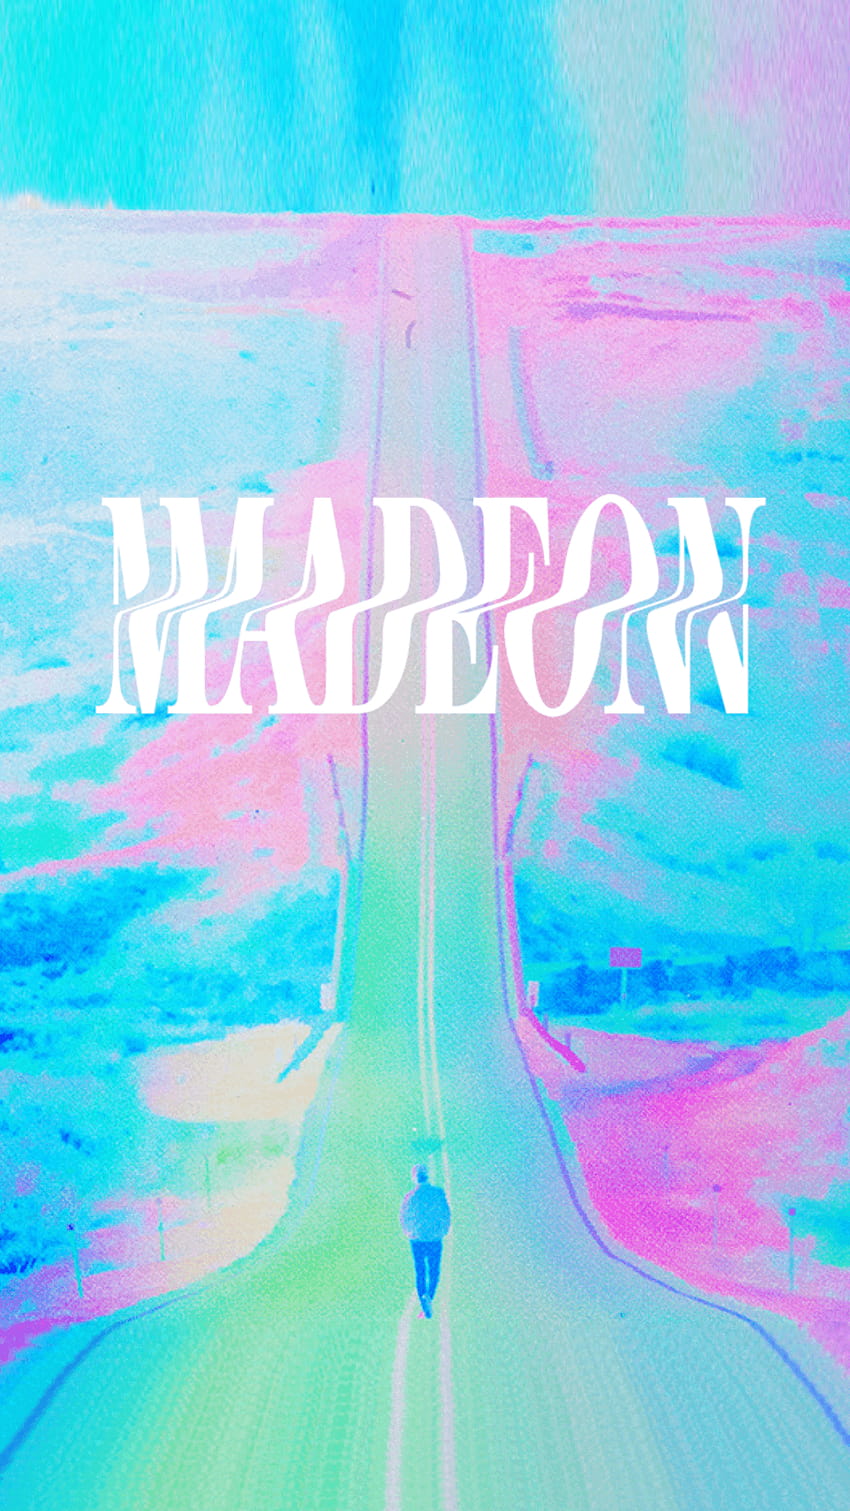 I made a simple phone from the tour promo, madeon phone HD phone wallpaper